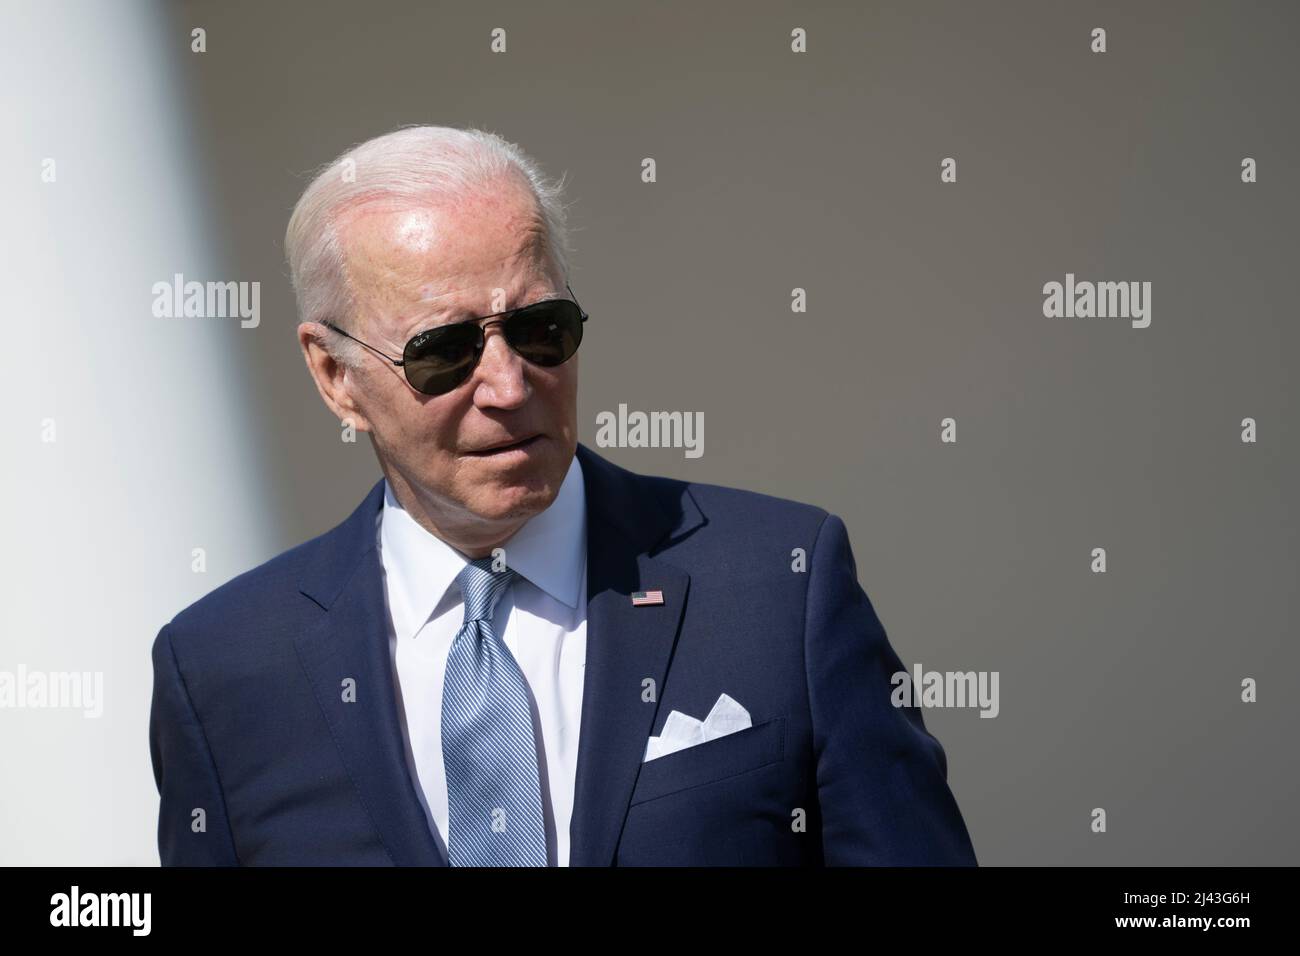 United States President Joe Biden listens during an event announcing new actions by his Administration to fight gun crime, at the White House in Washington, DC, April 11, 2022. Credit: Chris Kleponis/Pool via CNP /MediaPunch Stock Photo